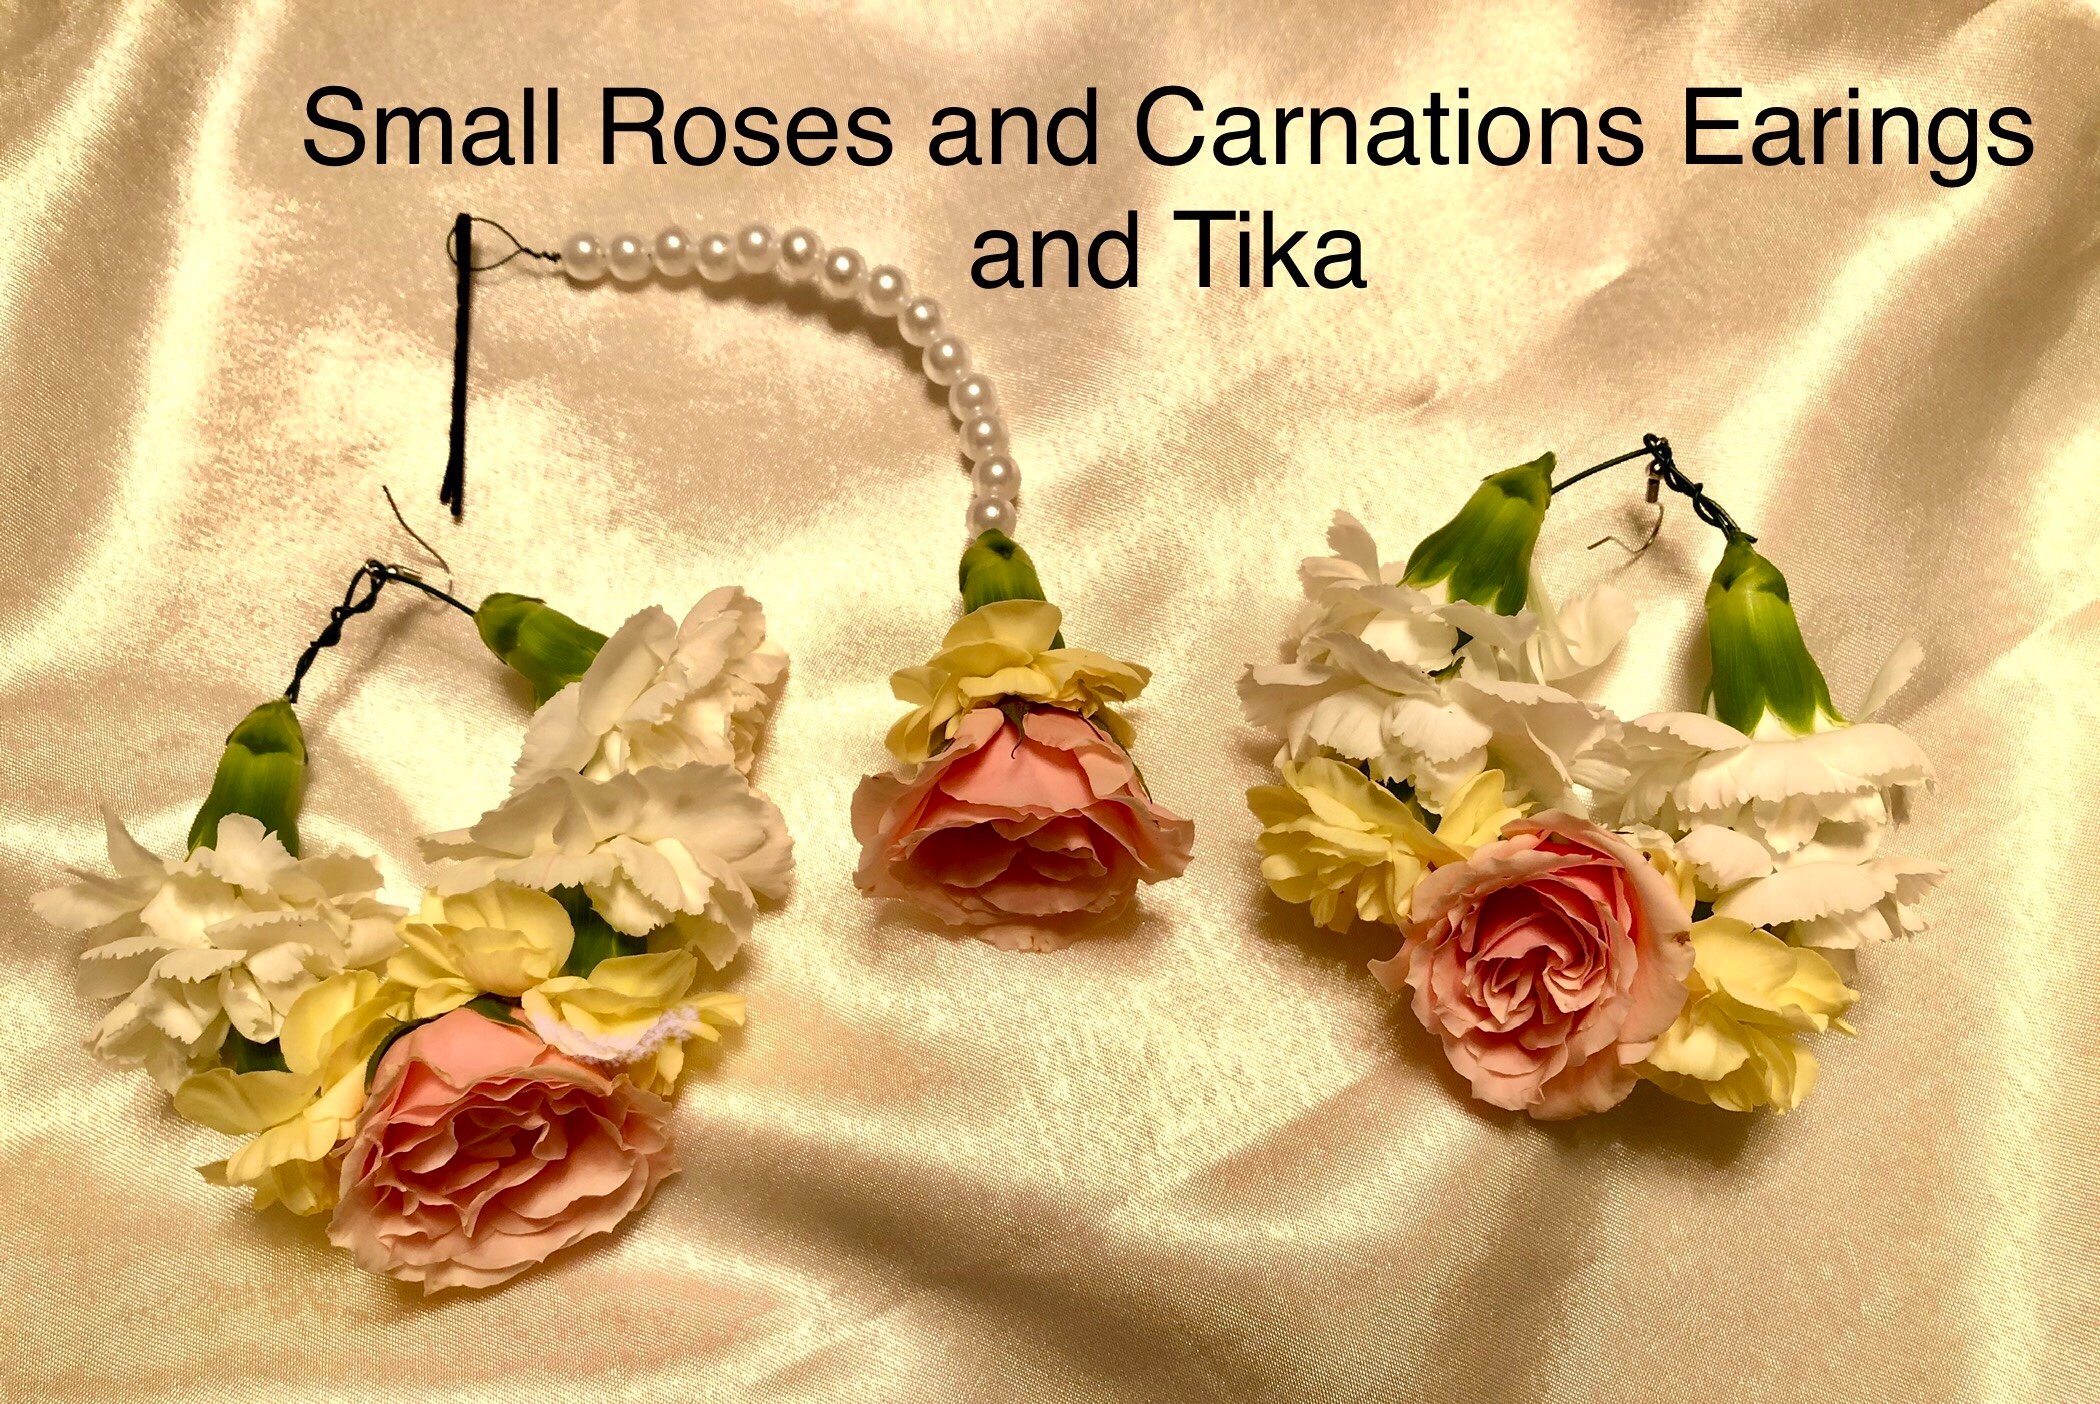 Small Roses and Carnations Earings and Tika 